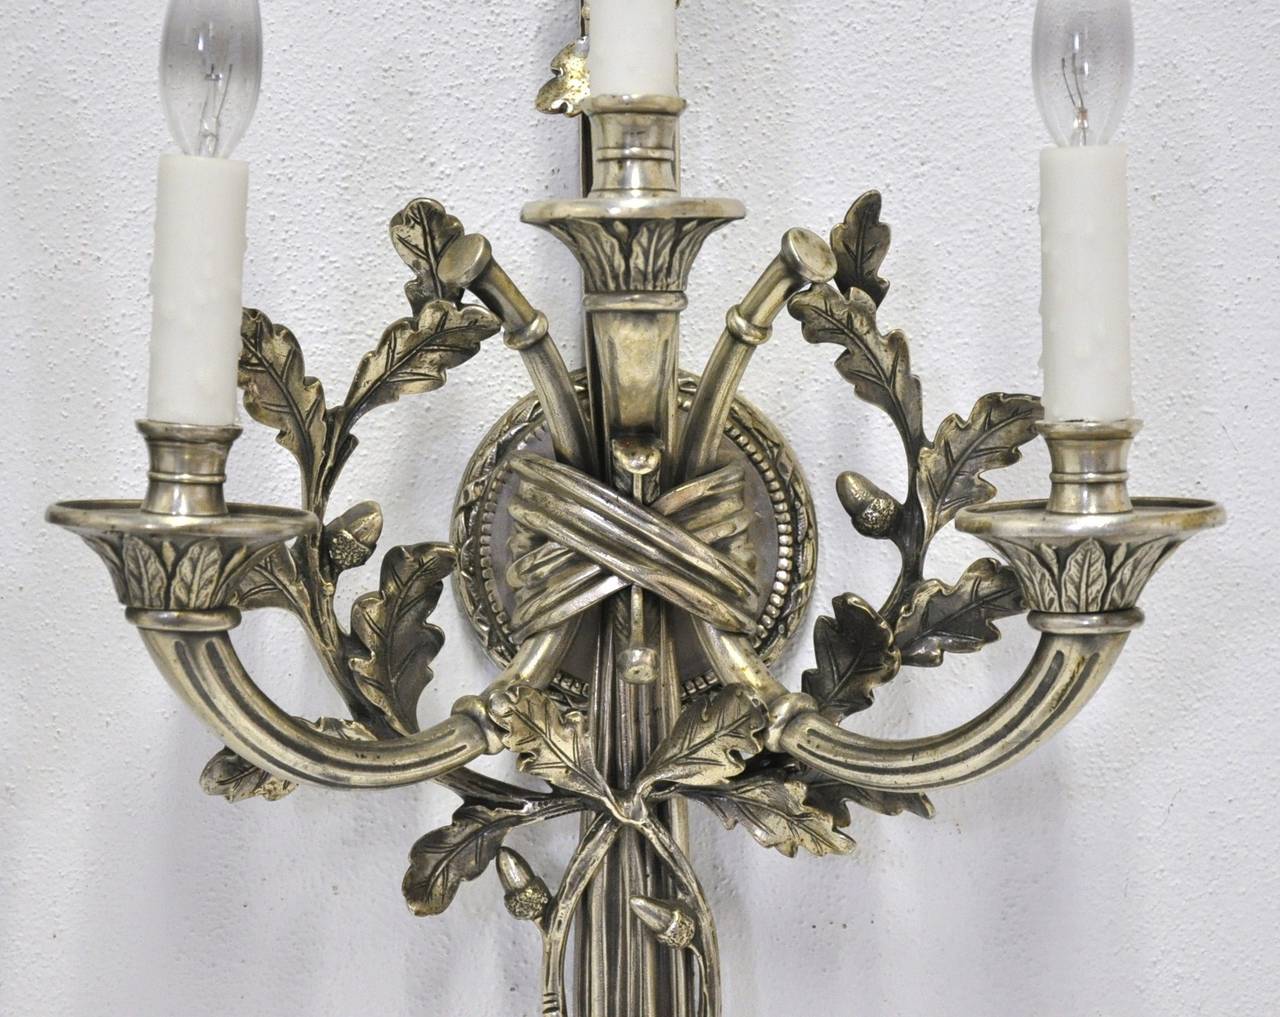 Fabulous pair of silver bronze sconces with 3 arms and waxed candles. Re-wired.